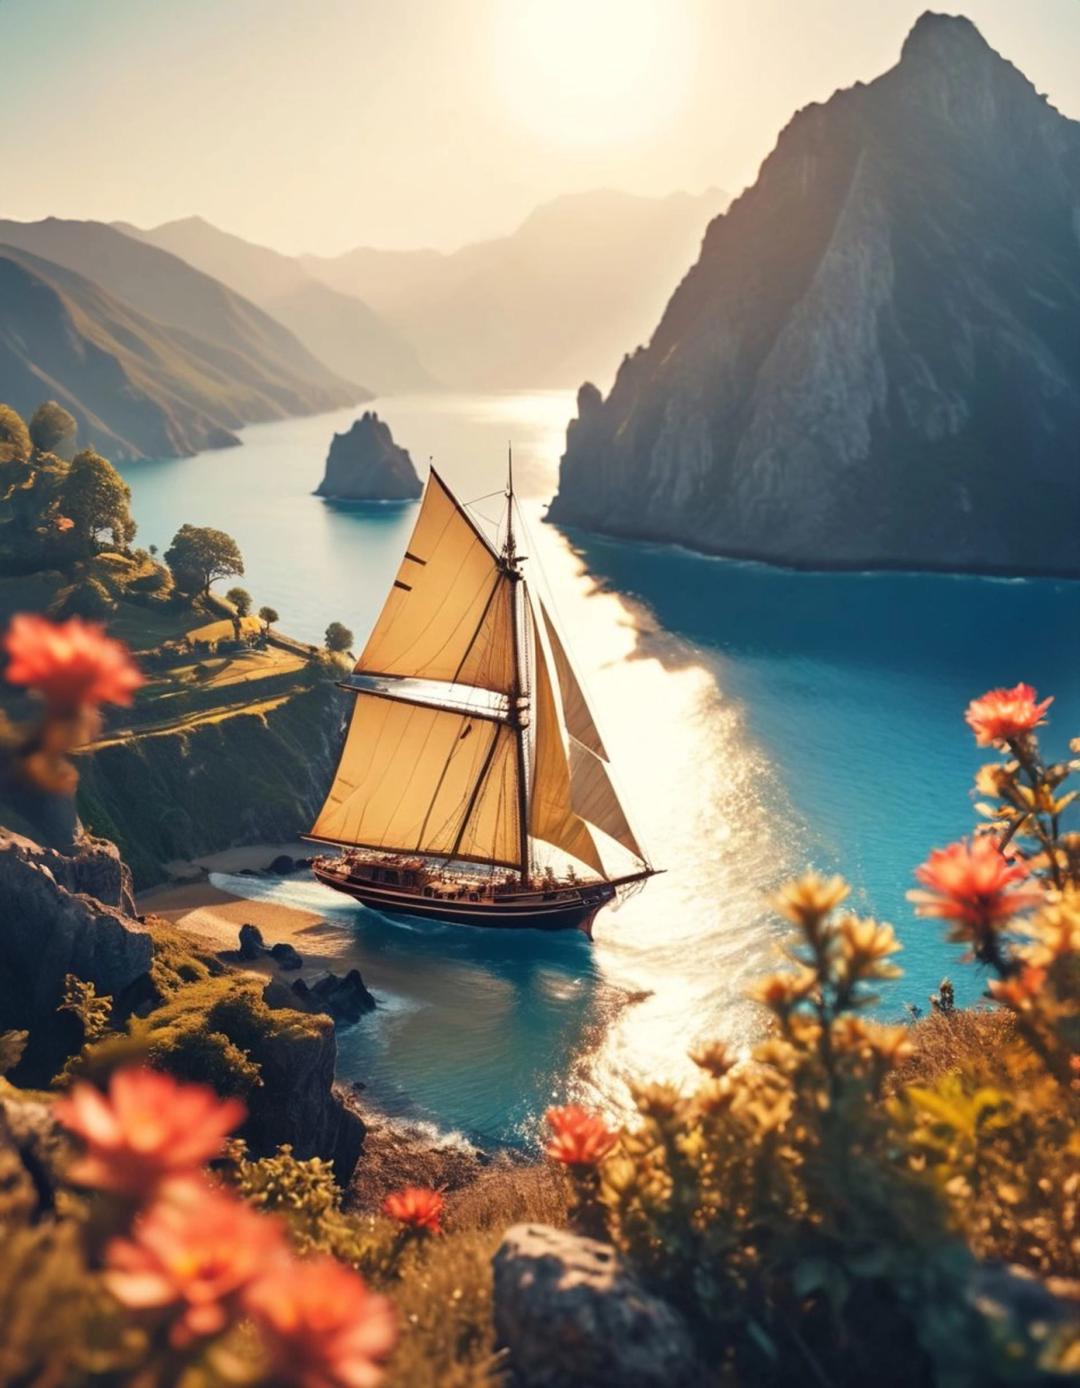 sailboat sailing on a body of water near mountains and flowers